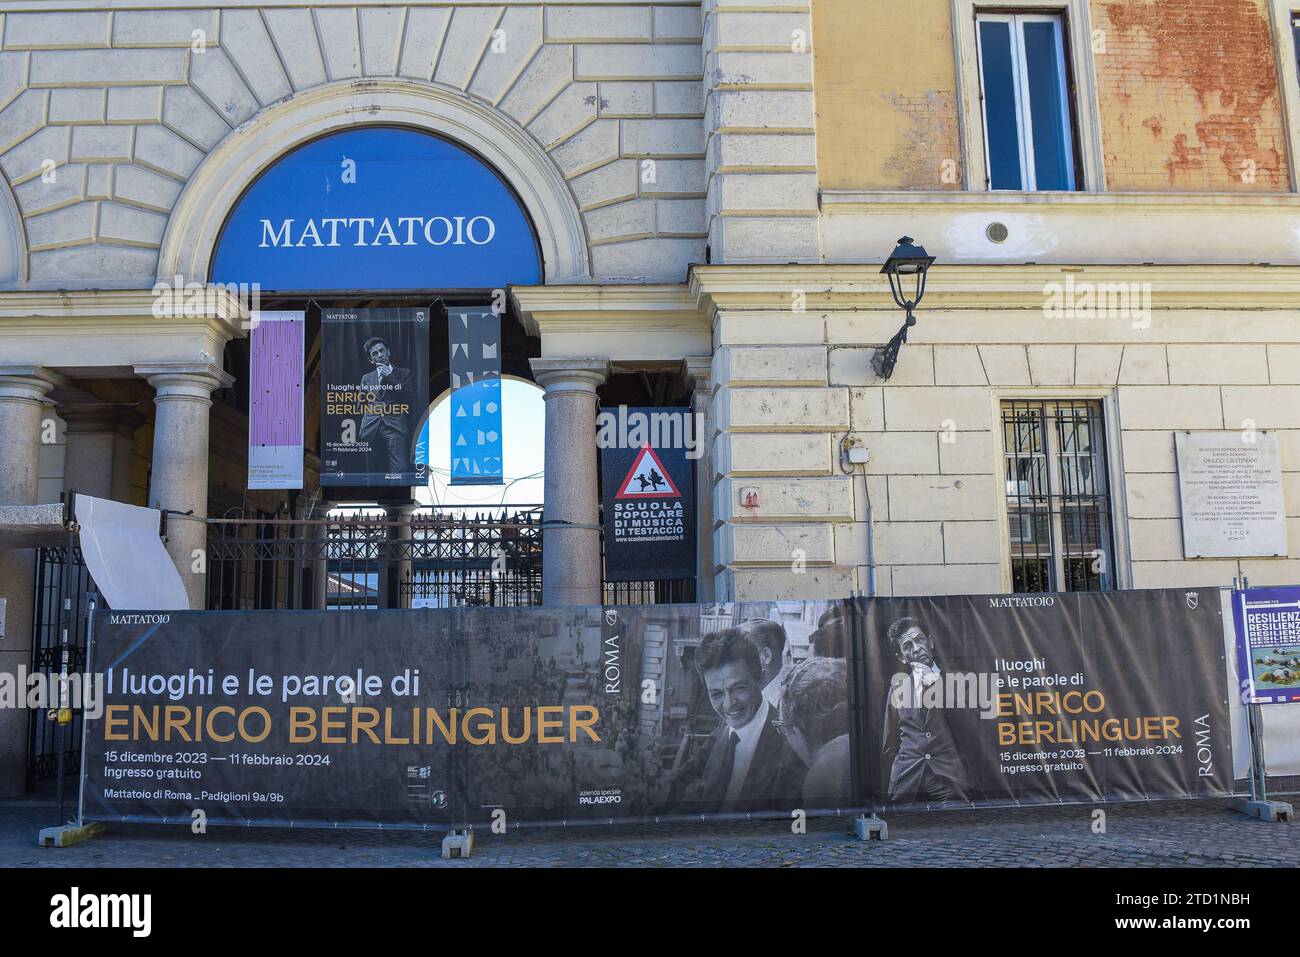 External view of the exhibition 'The places and words of Enrico Berlinguer', at the Mattatoio. The exhibition is dedicated to the figure of Enrico Berlinguer, one of the protagonists of Italian political history of the twentieth century and secretary of the Italian Communist Party from 1972 to 1984, for the centenary of his birth. Stock Photo